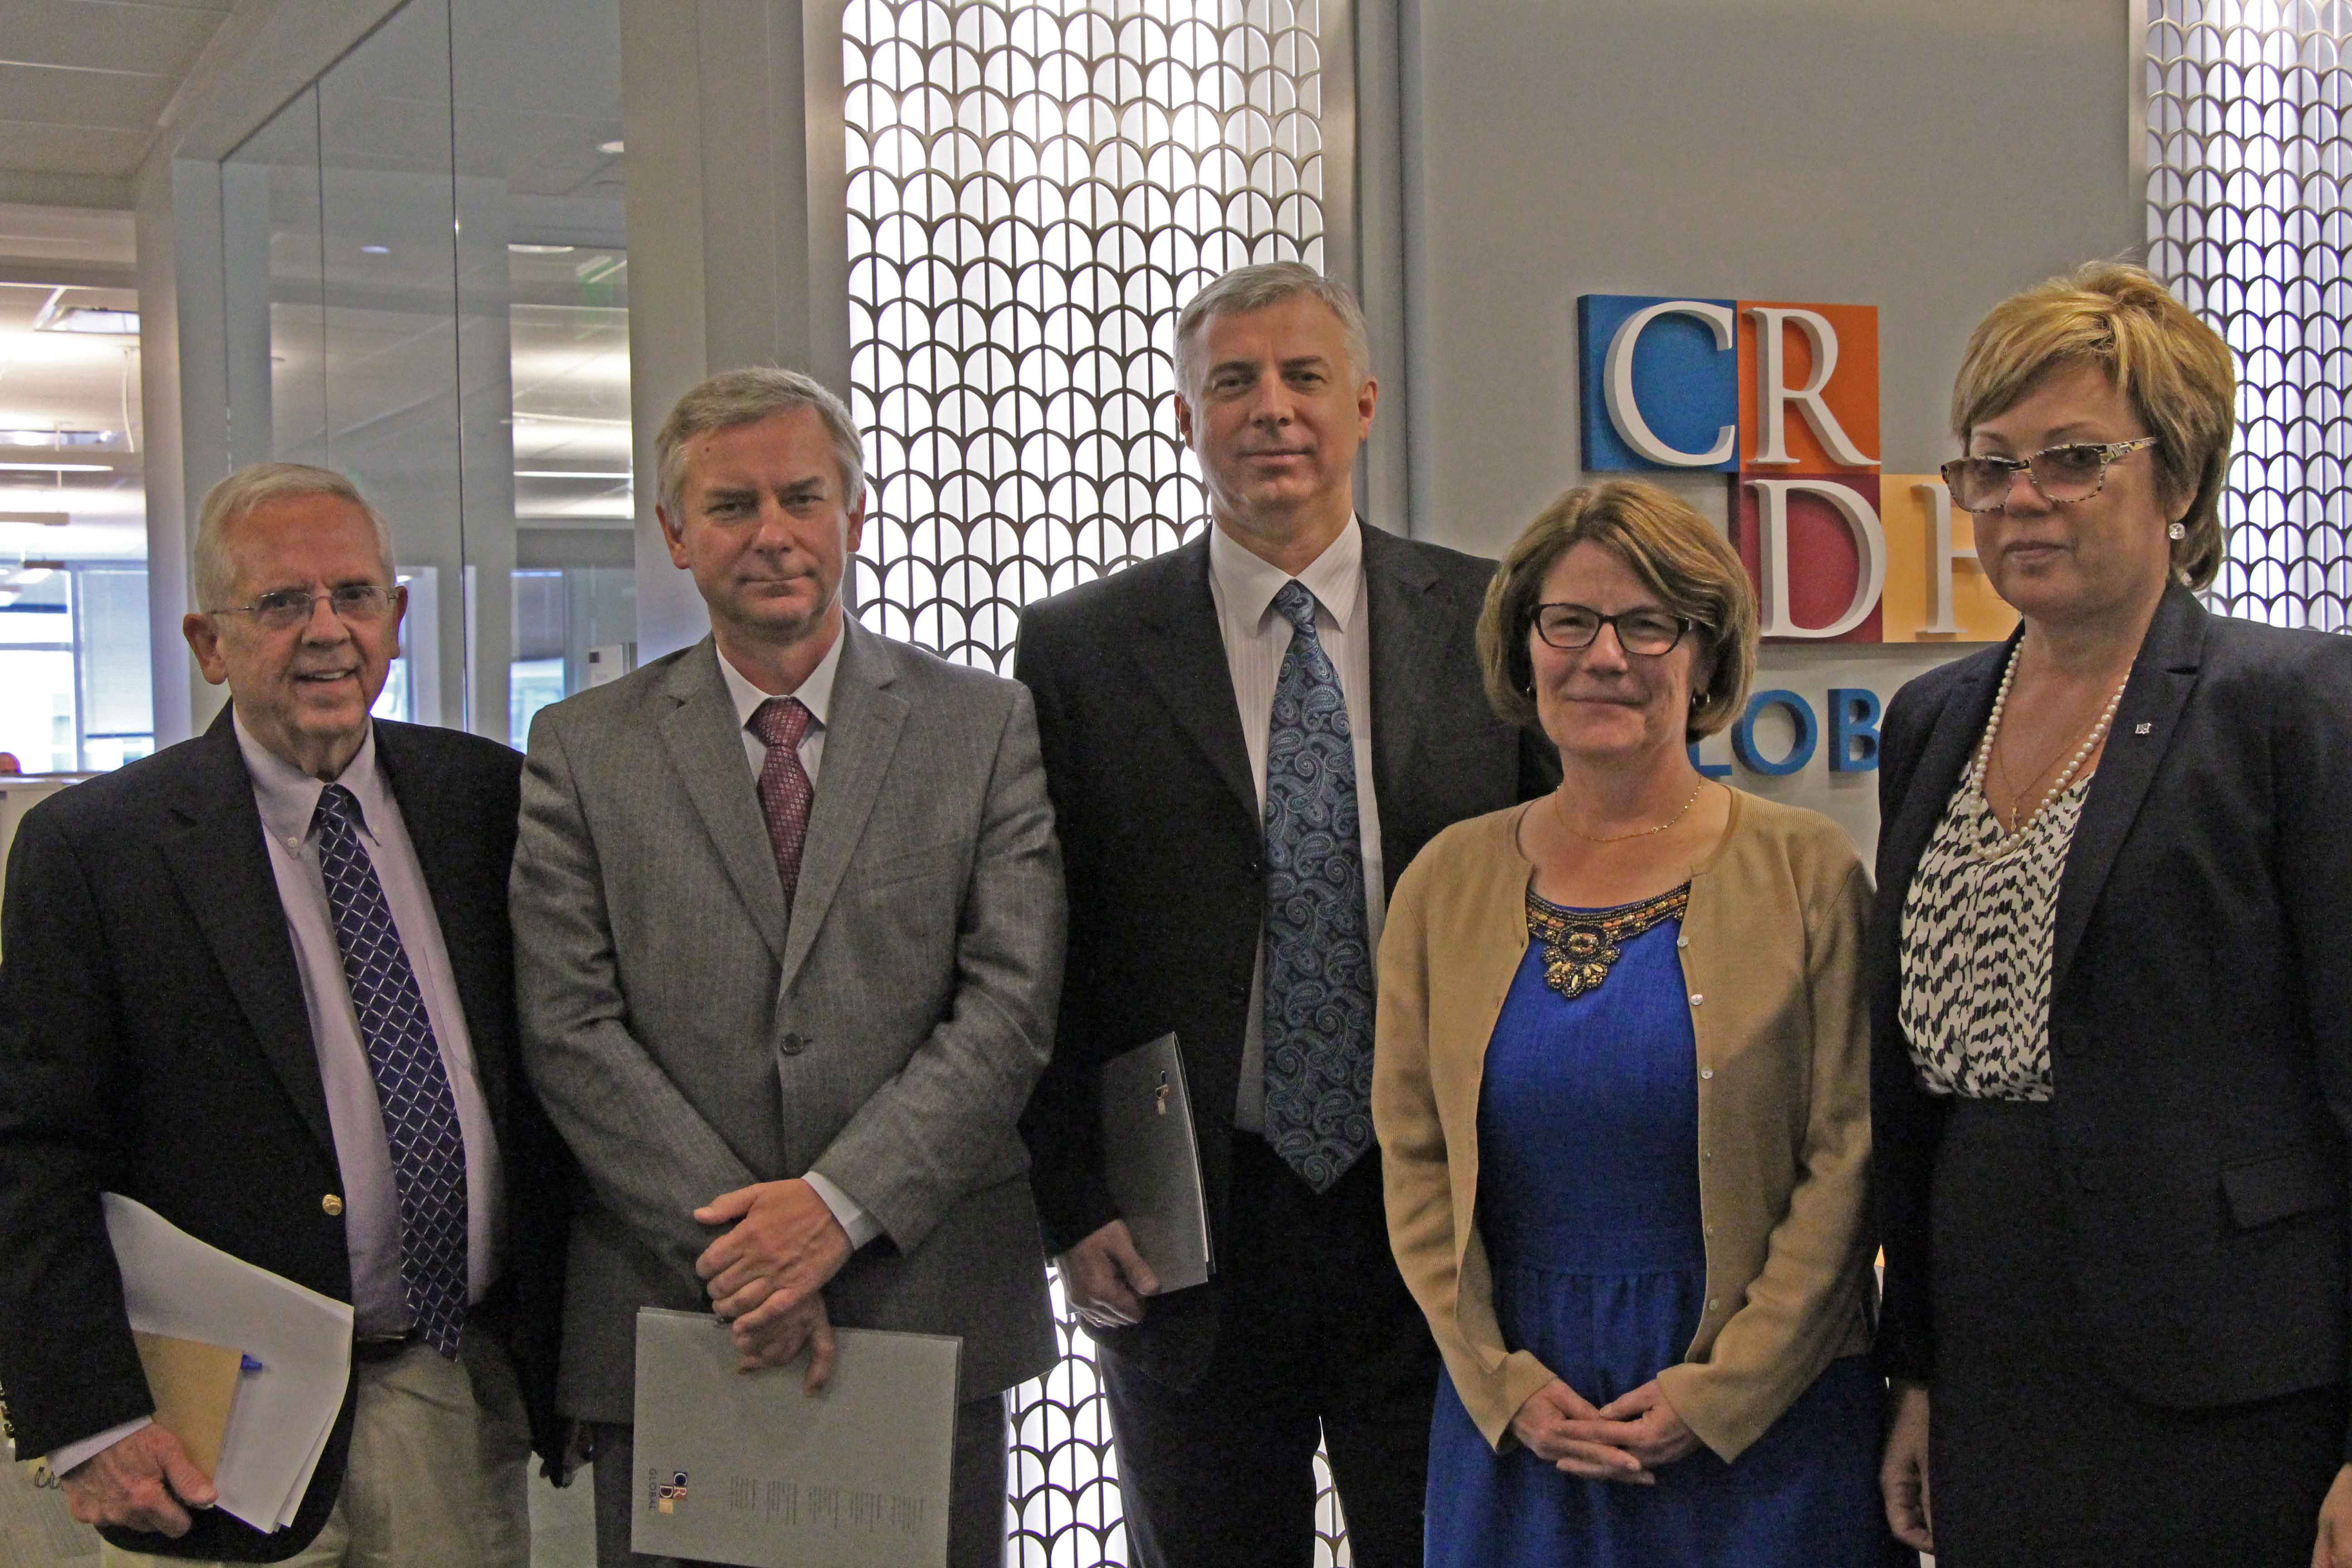 Minister Kvit meets with CRDF Global executives during a visit to its headquarters in Arlington, VA